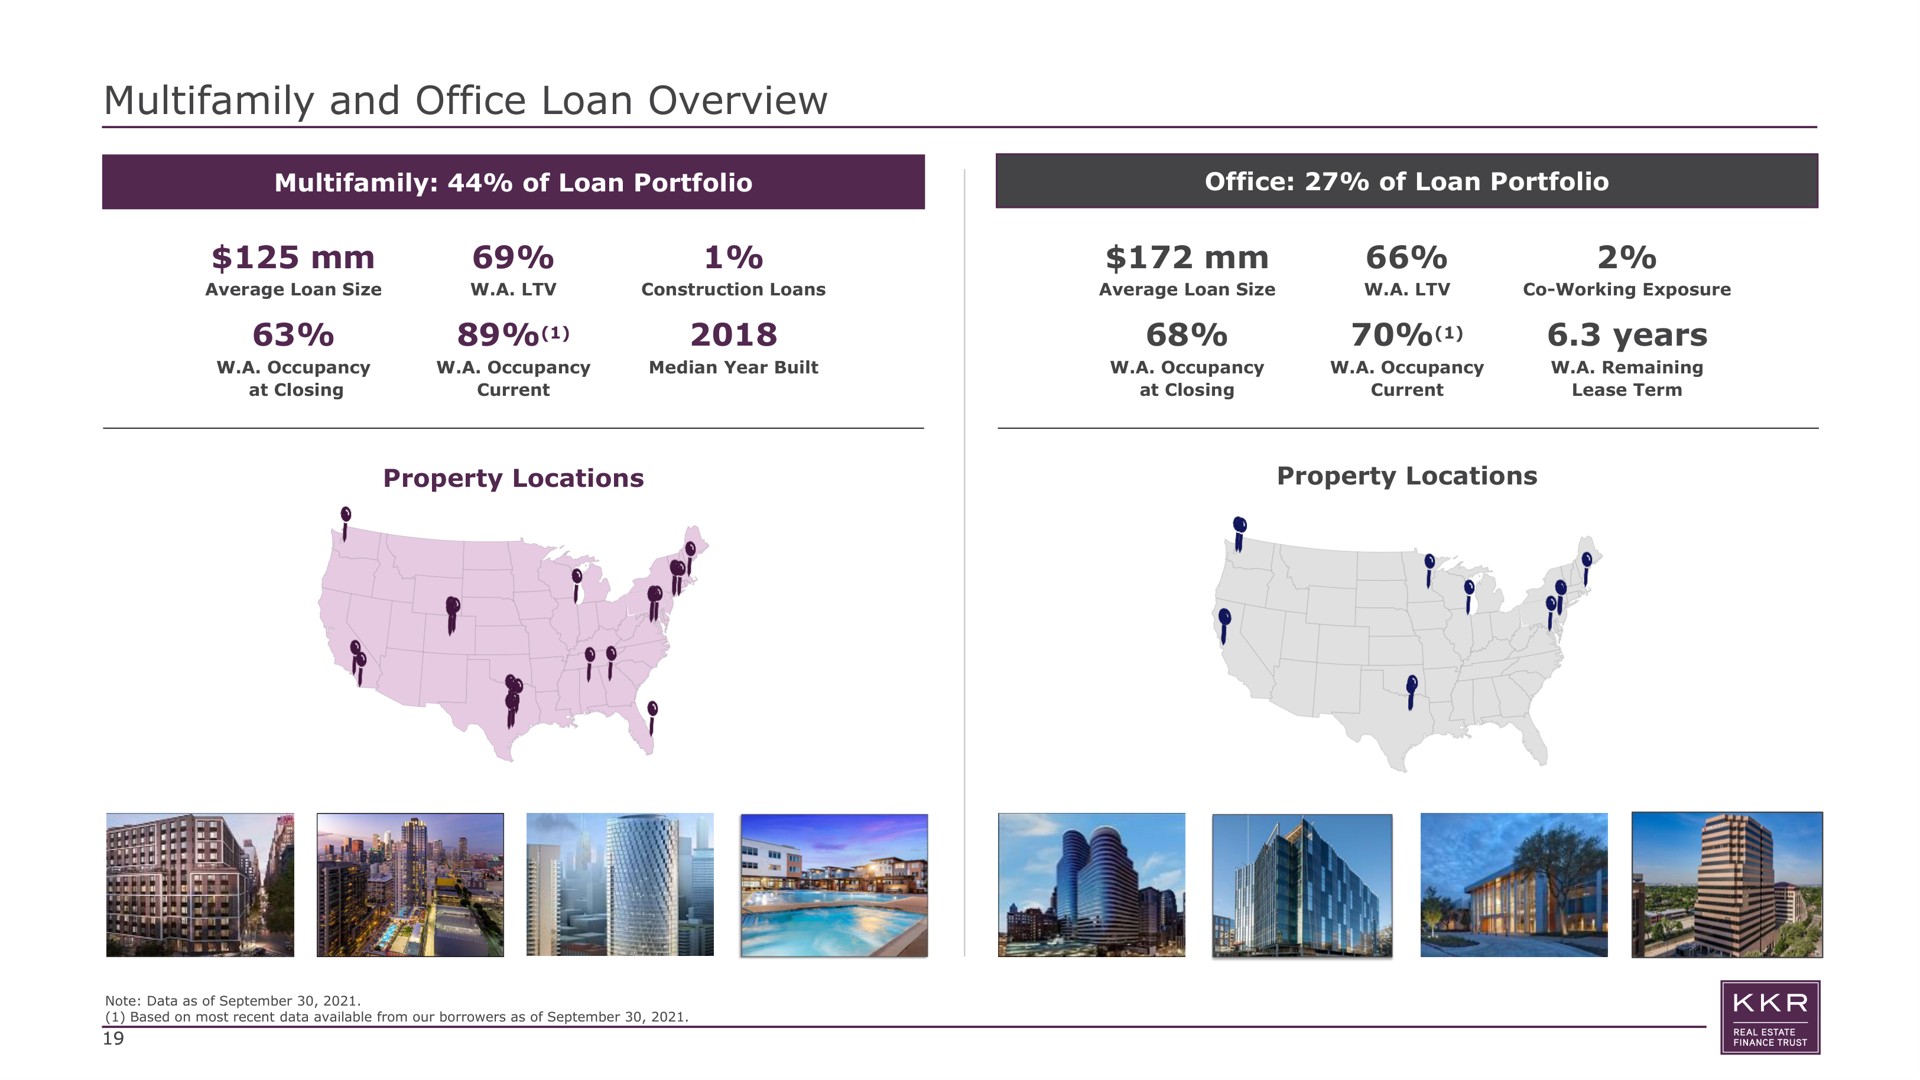 and office loan overview of loan portfolio office of loan portfolio years property locations property locations | KKR Real Estate Finance Trust